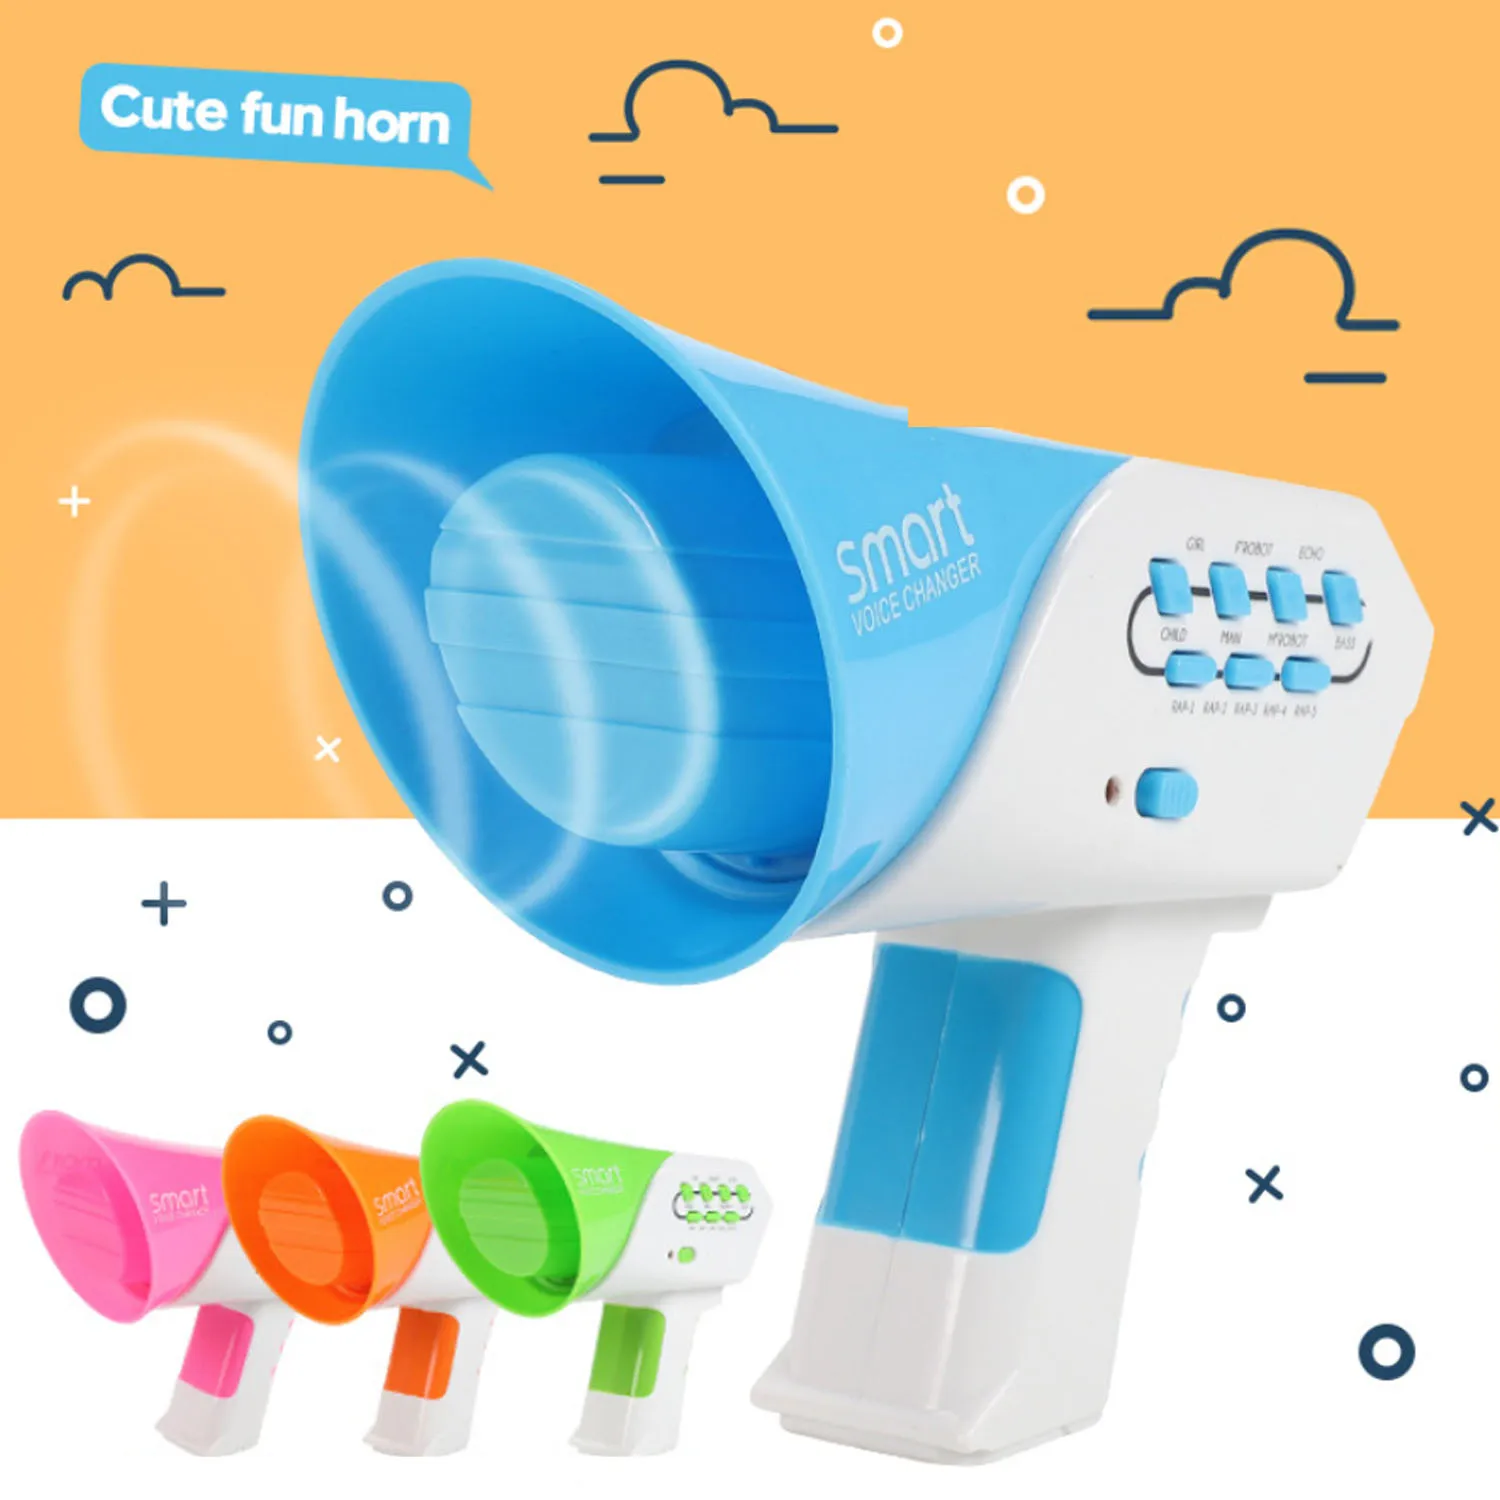 Kids Voice Changer Toy Funny Loudspeaker Megaphone Voice changing Intercom Electronic Toys with 7 Sounds Effects Educational Toy